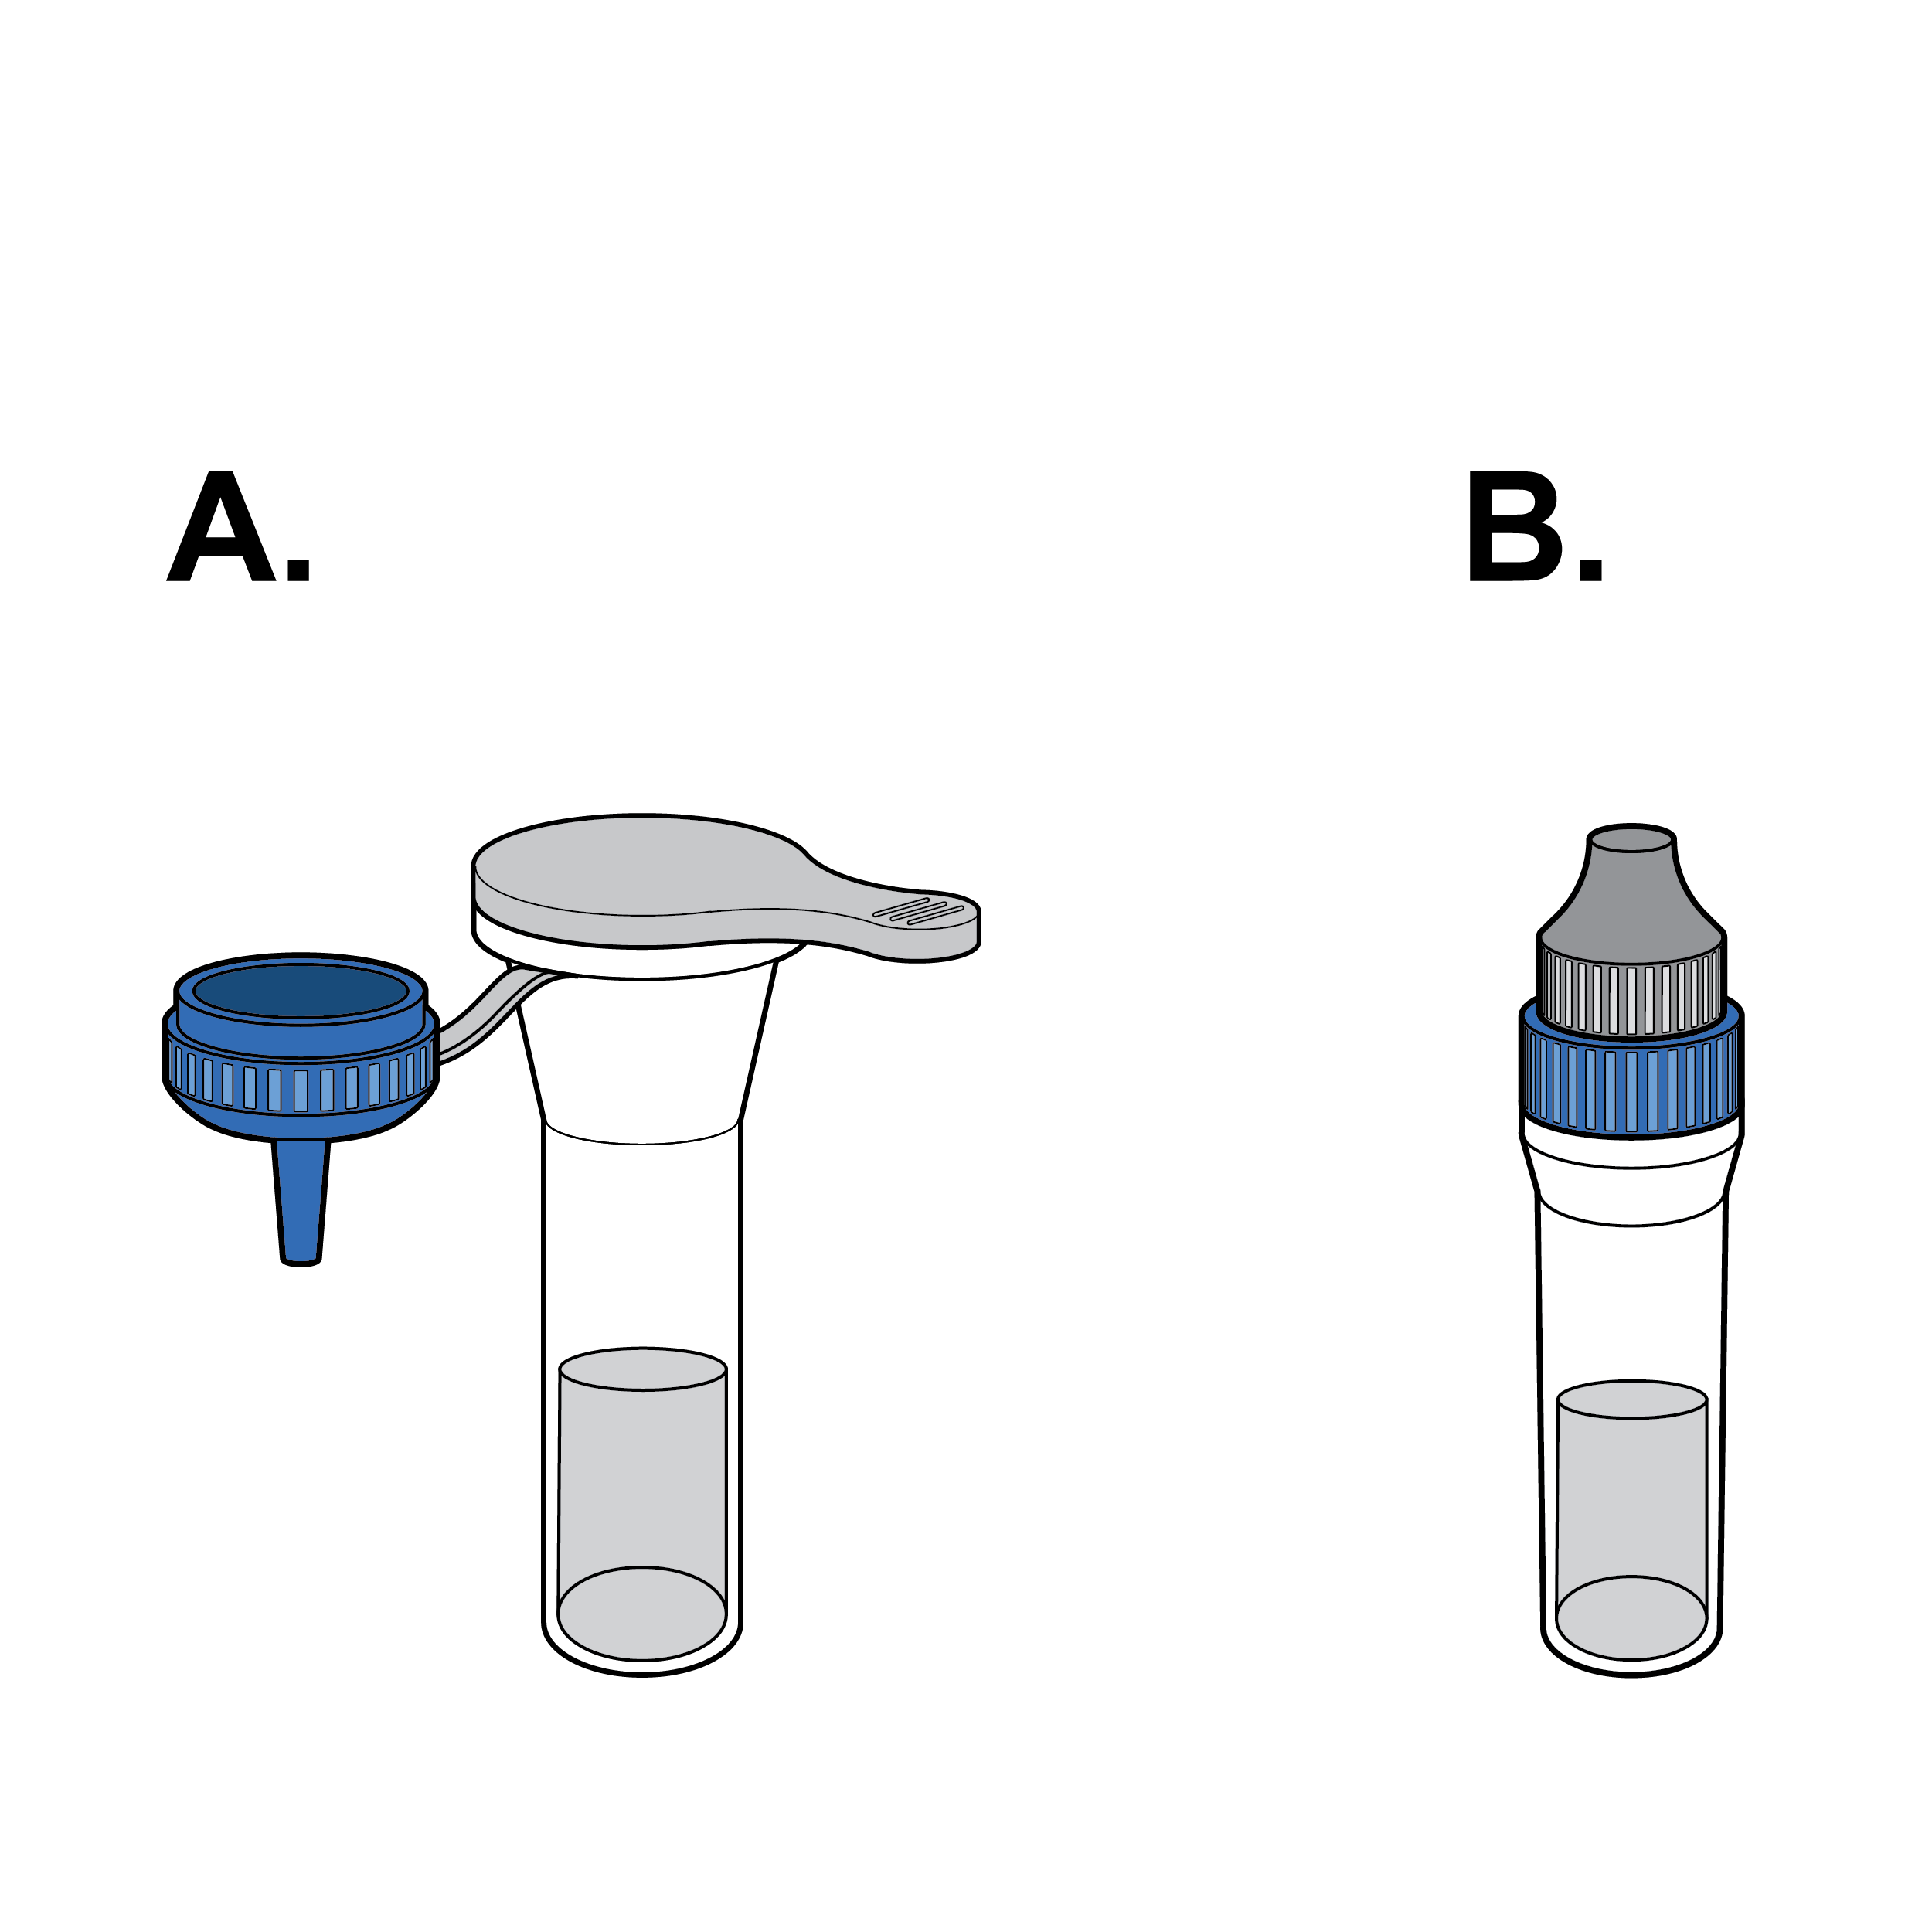 Panel A shows a prefilled fluid vial that includes a removable cap which seals the vial, and panel B shows a prefilled fluid vial with a secondary dropper cap which enables the controlled dispensing of fluid.